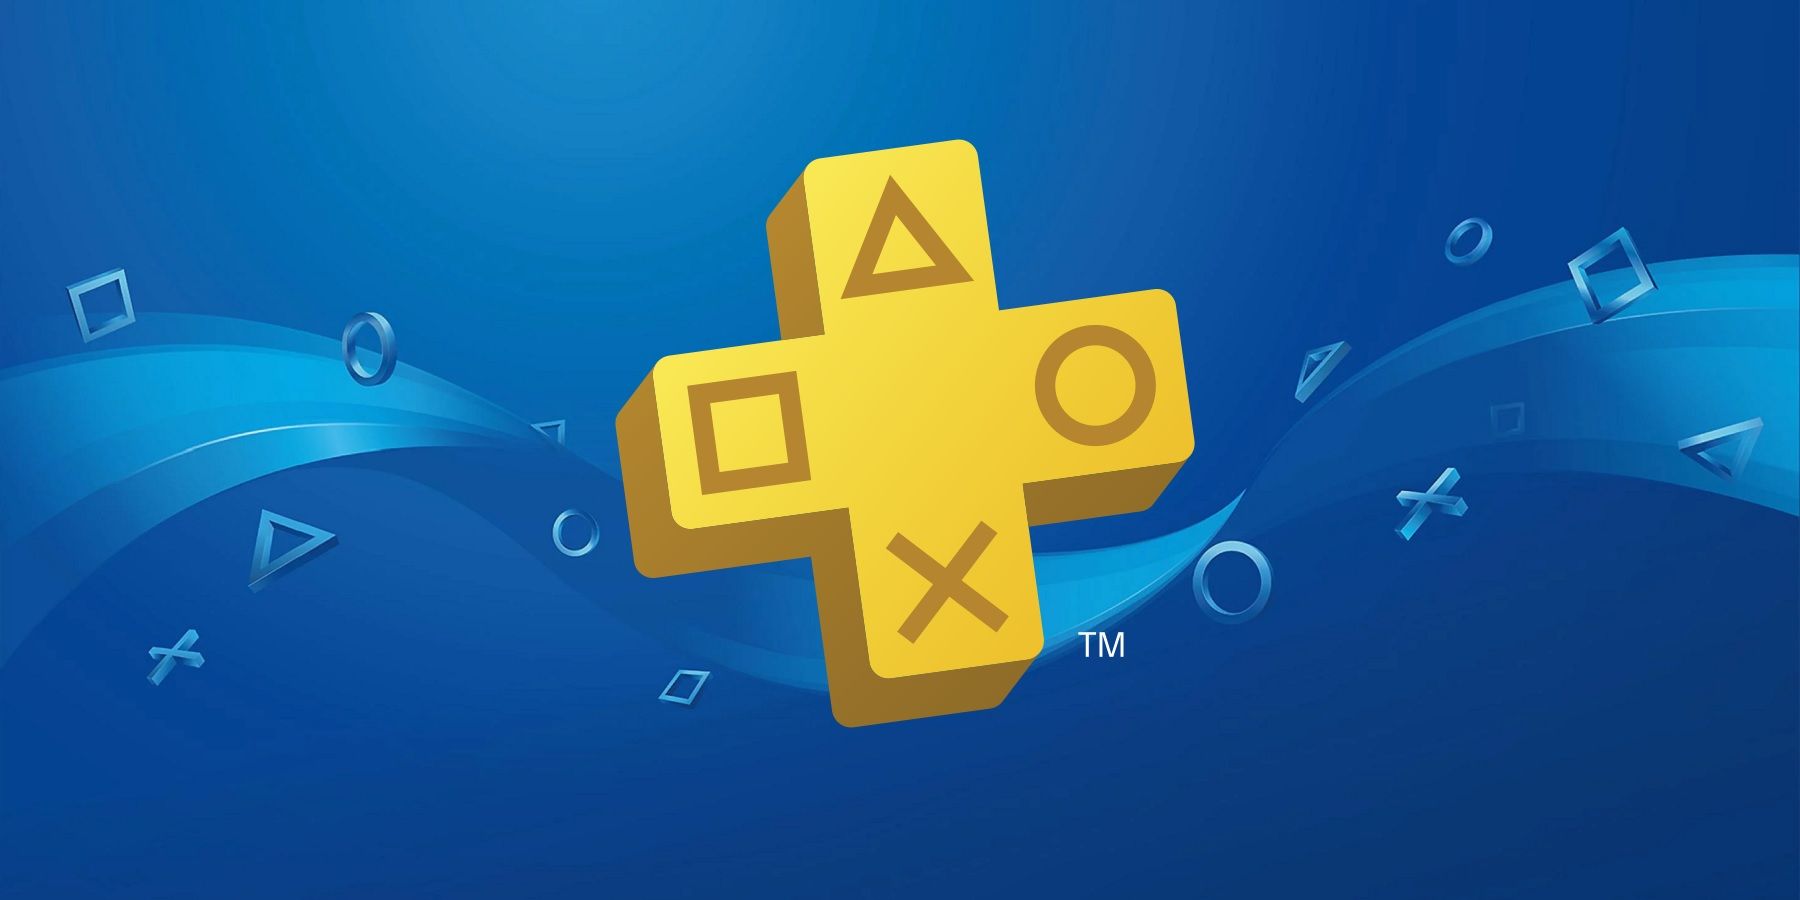 Playstation Now Losing 56 Games Before New PS Plus Launch Rumor -  PlayStation LifeStyle